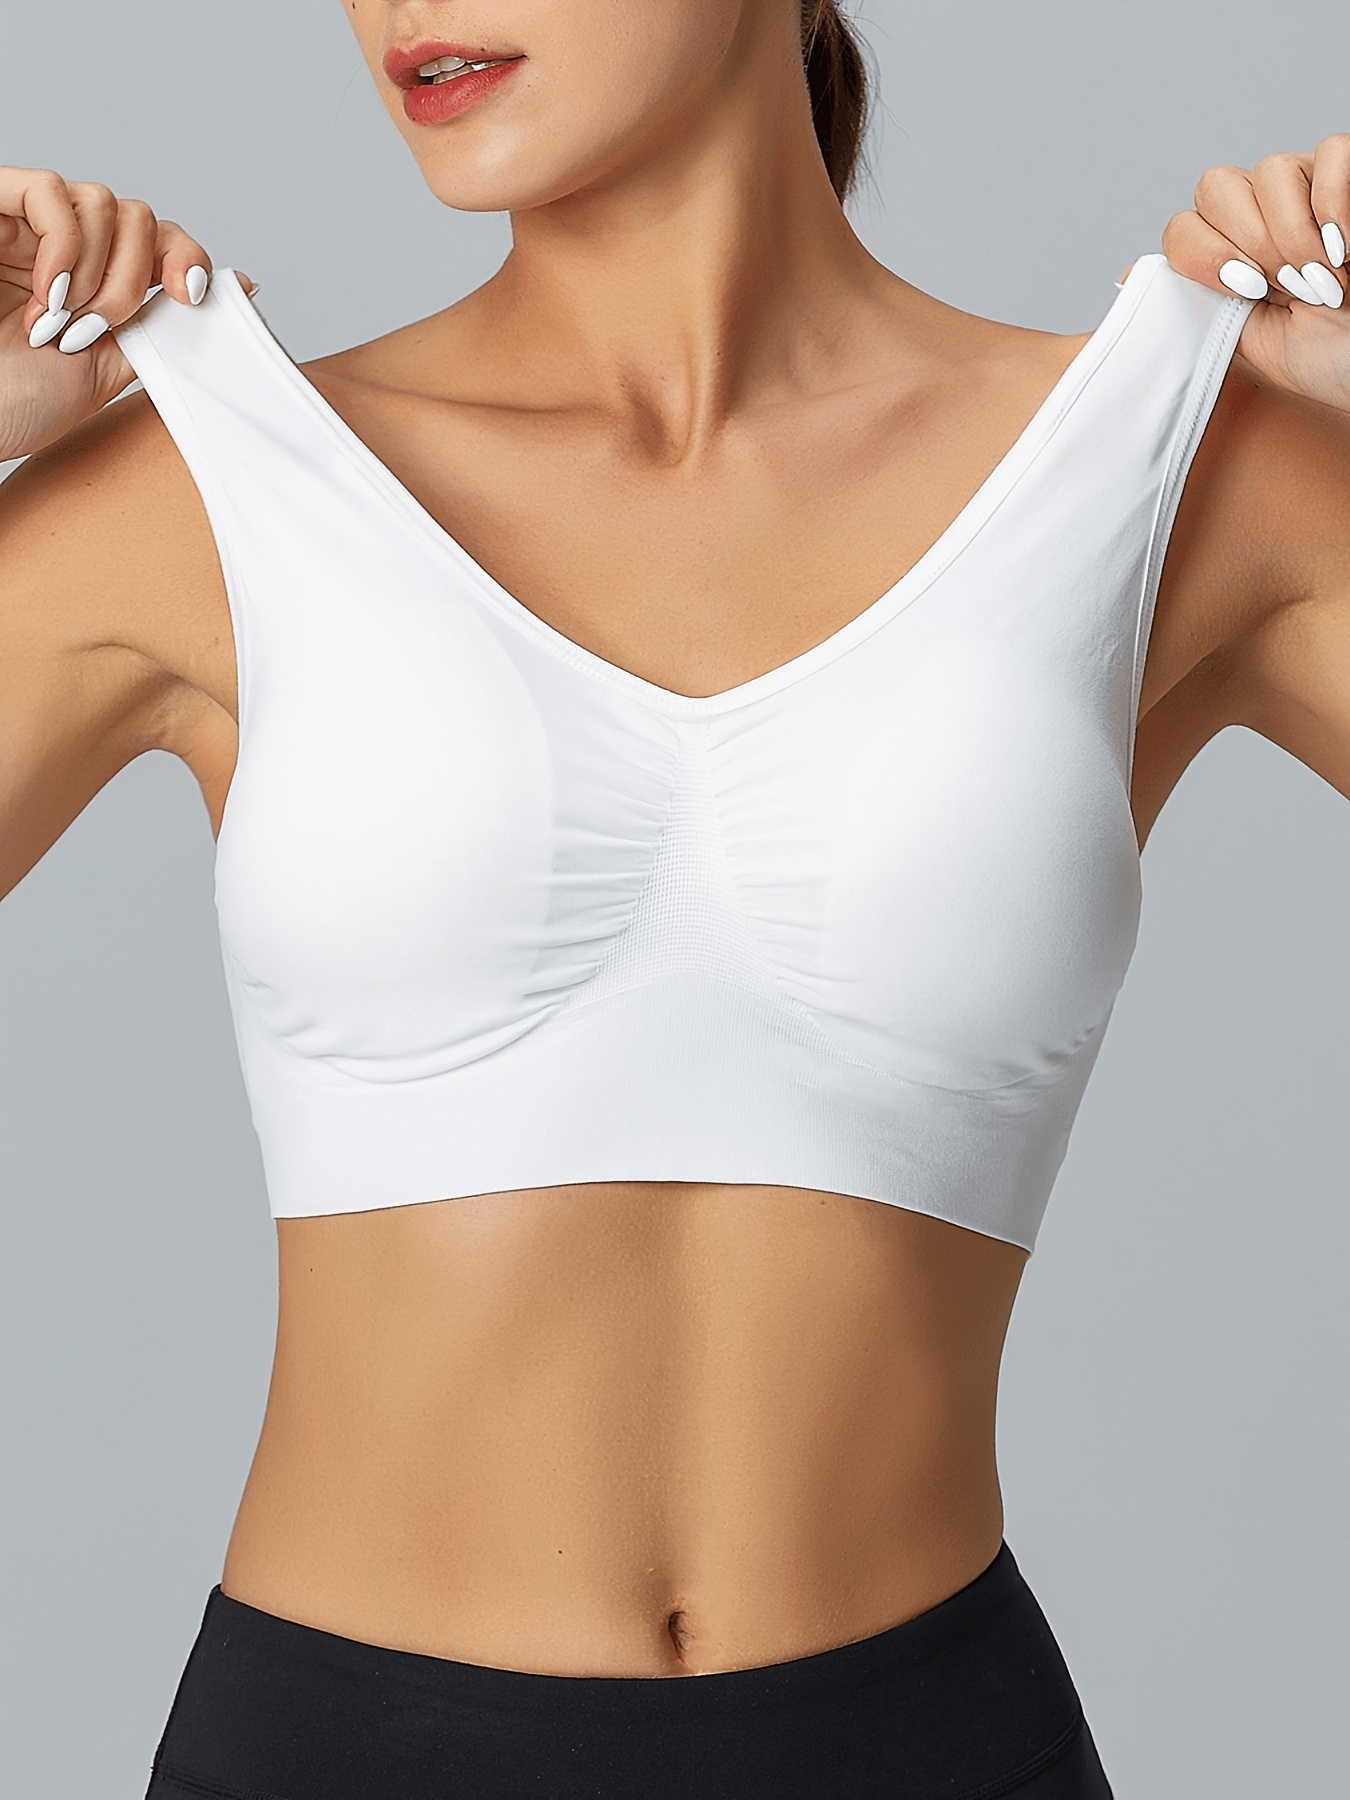 3pcs Solid Wireless Sports Bras Comfy & Breathable Running Workout